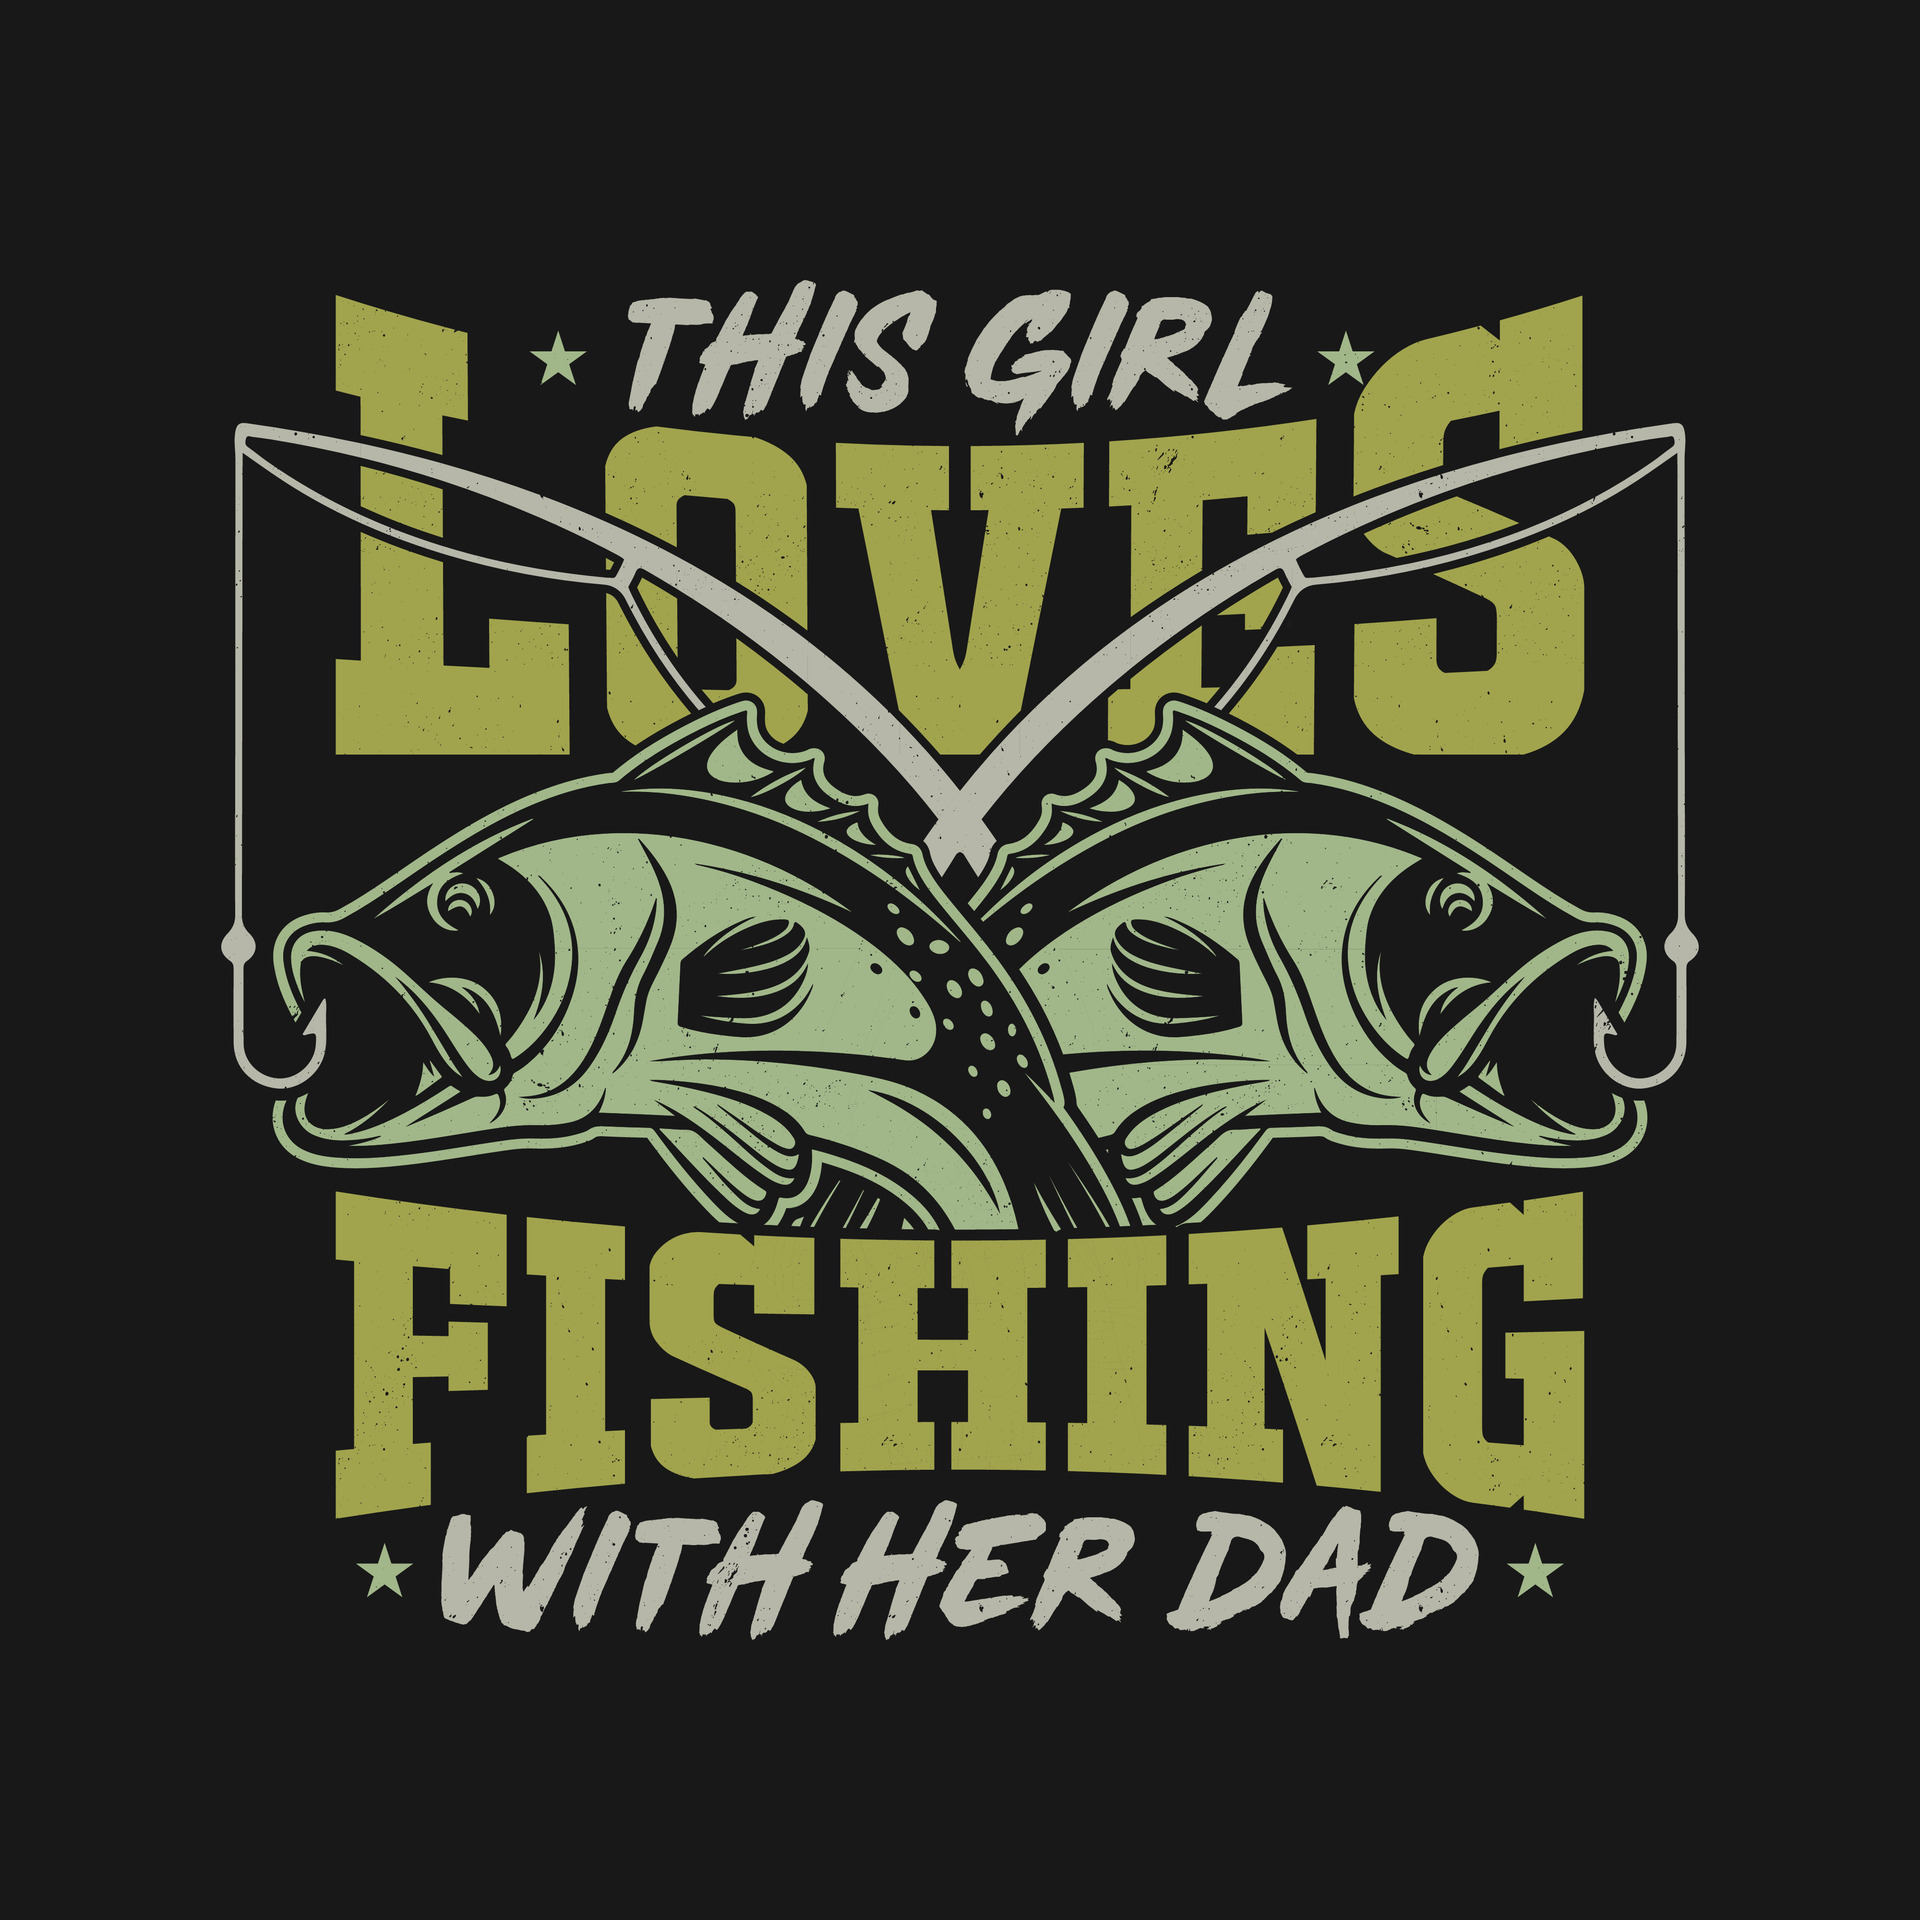 This Girl Loves Fishing With Her Dad - Father and Daughter Fishing